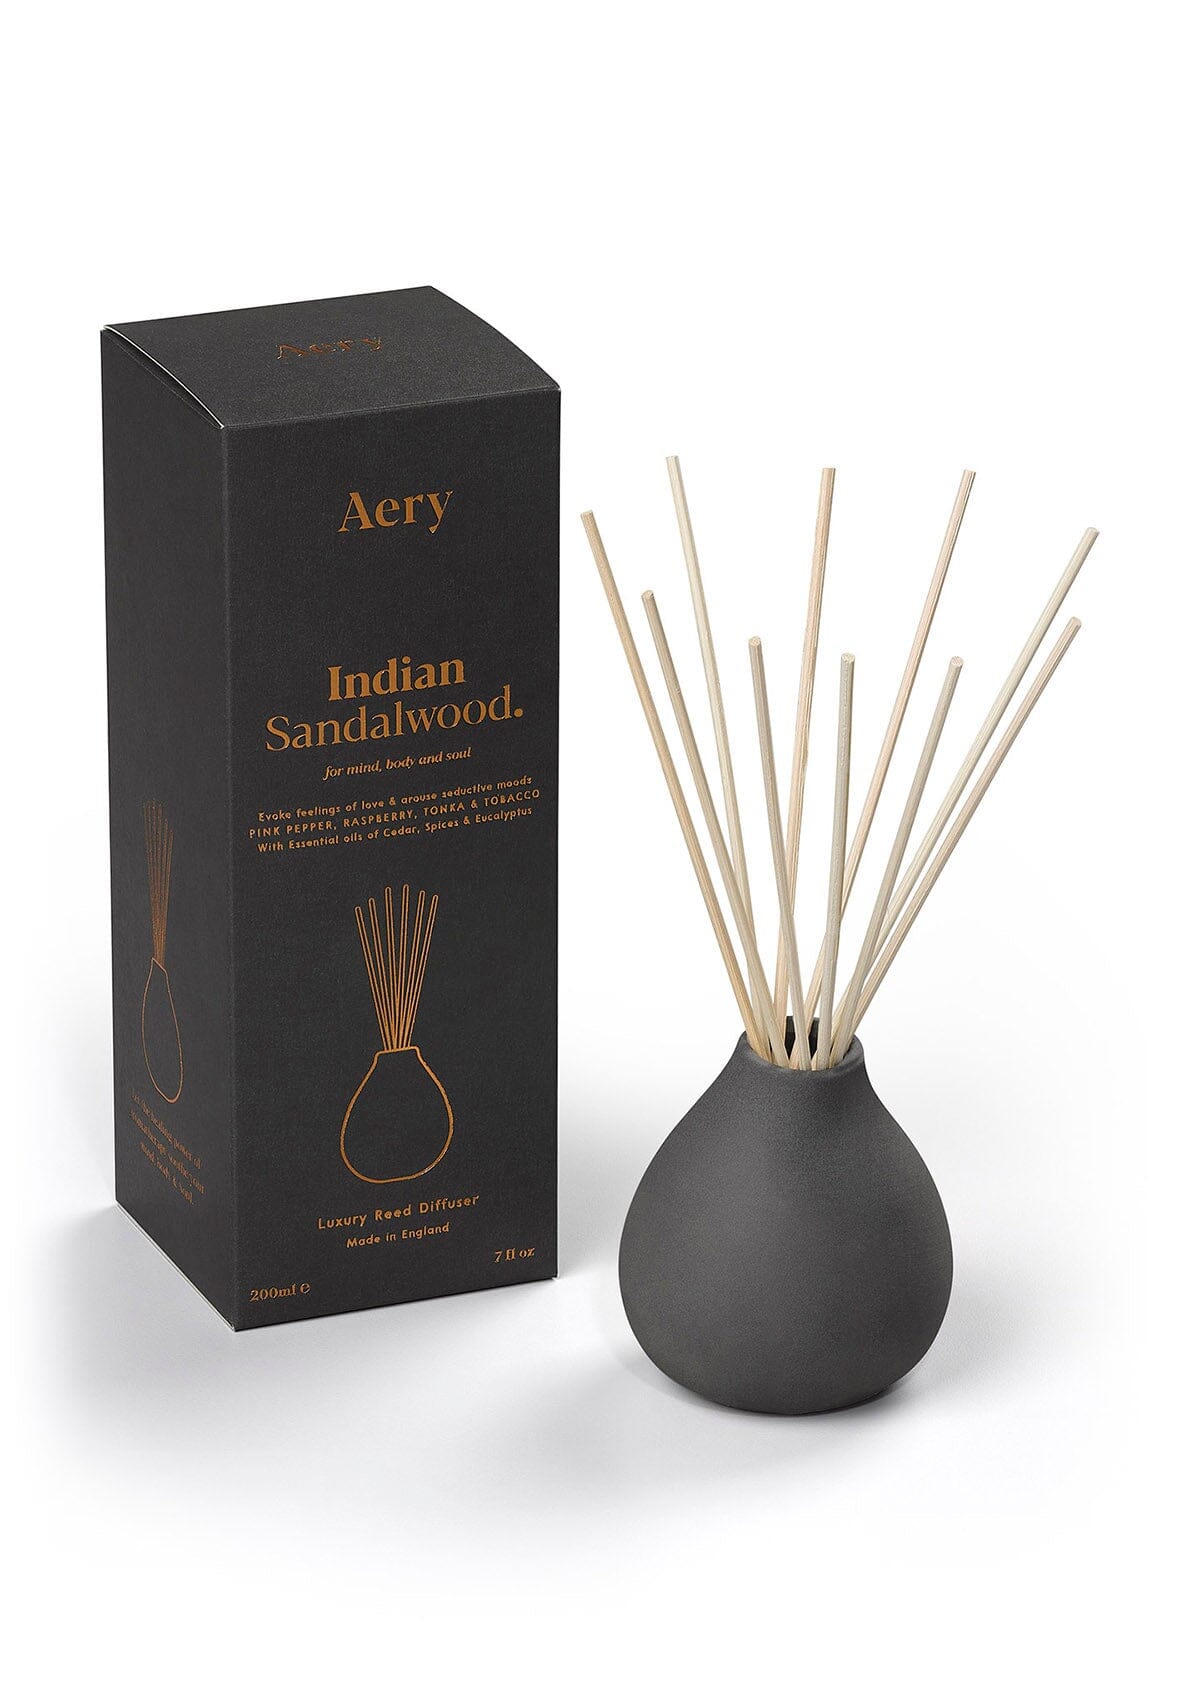 Black Indian Sandalwood diffuser with product packaging by Aery 